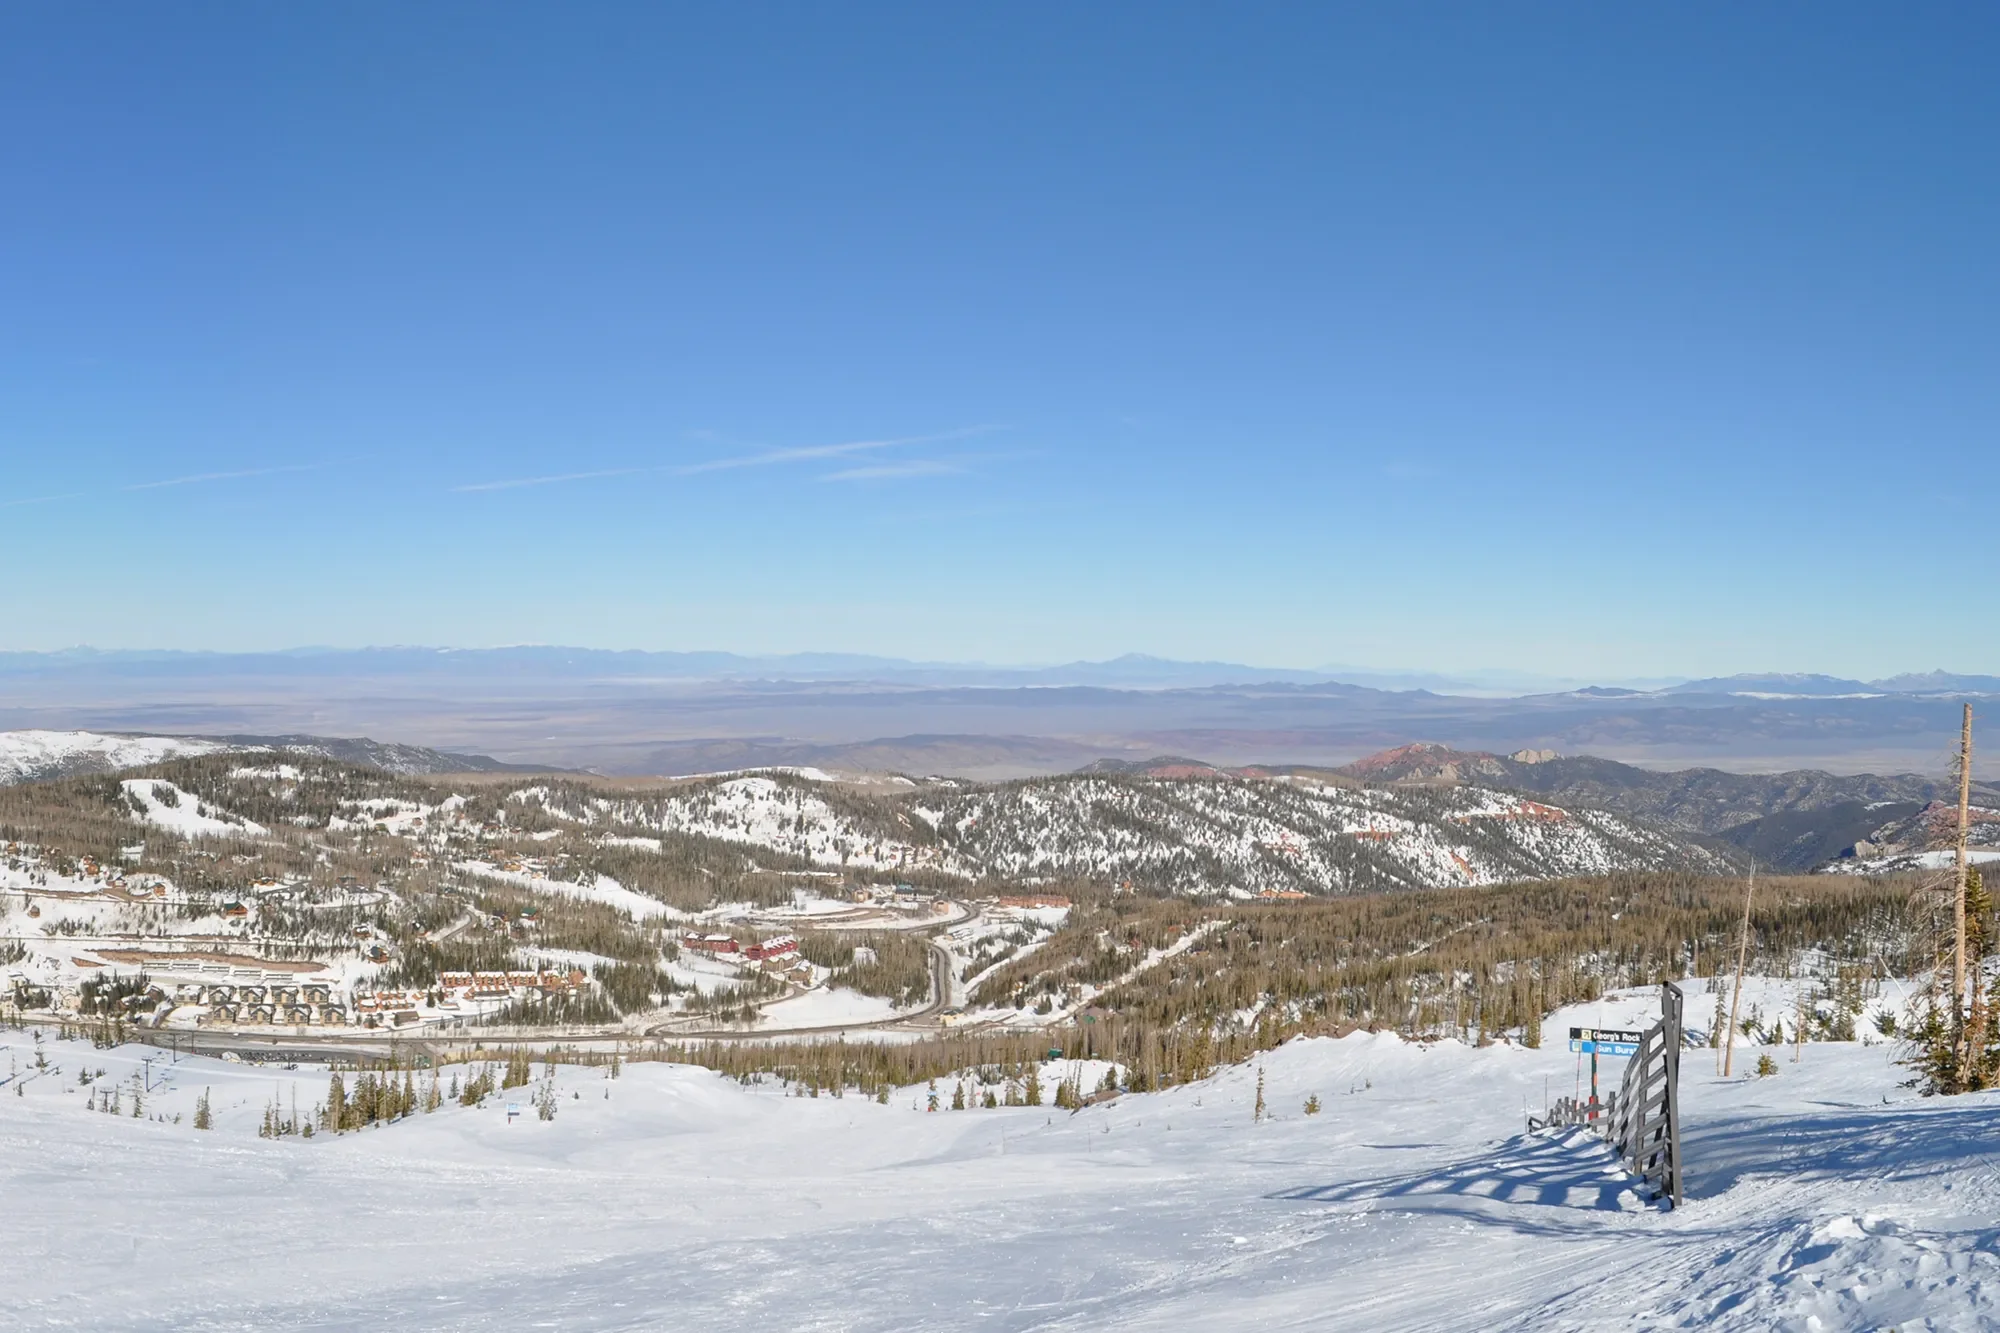 A view from Brian Head Ski Resort.